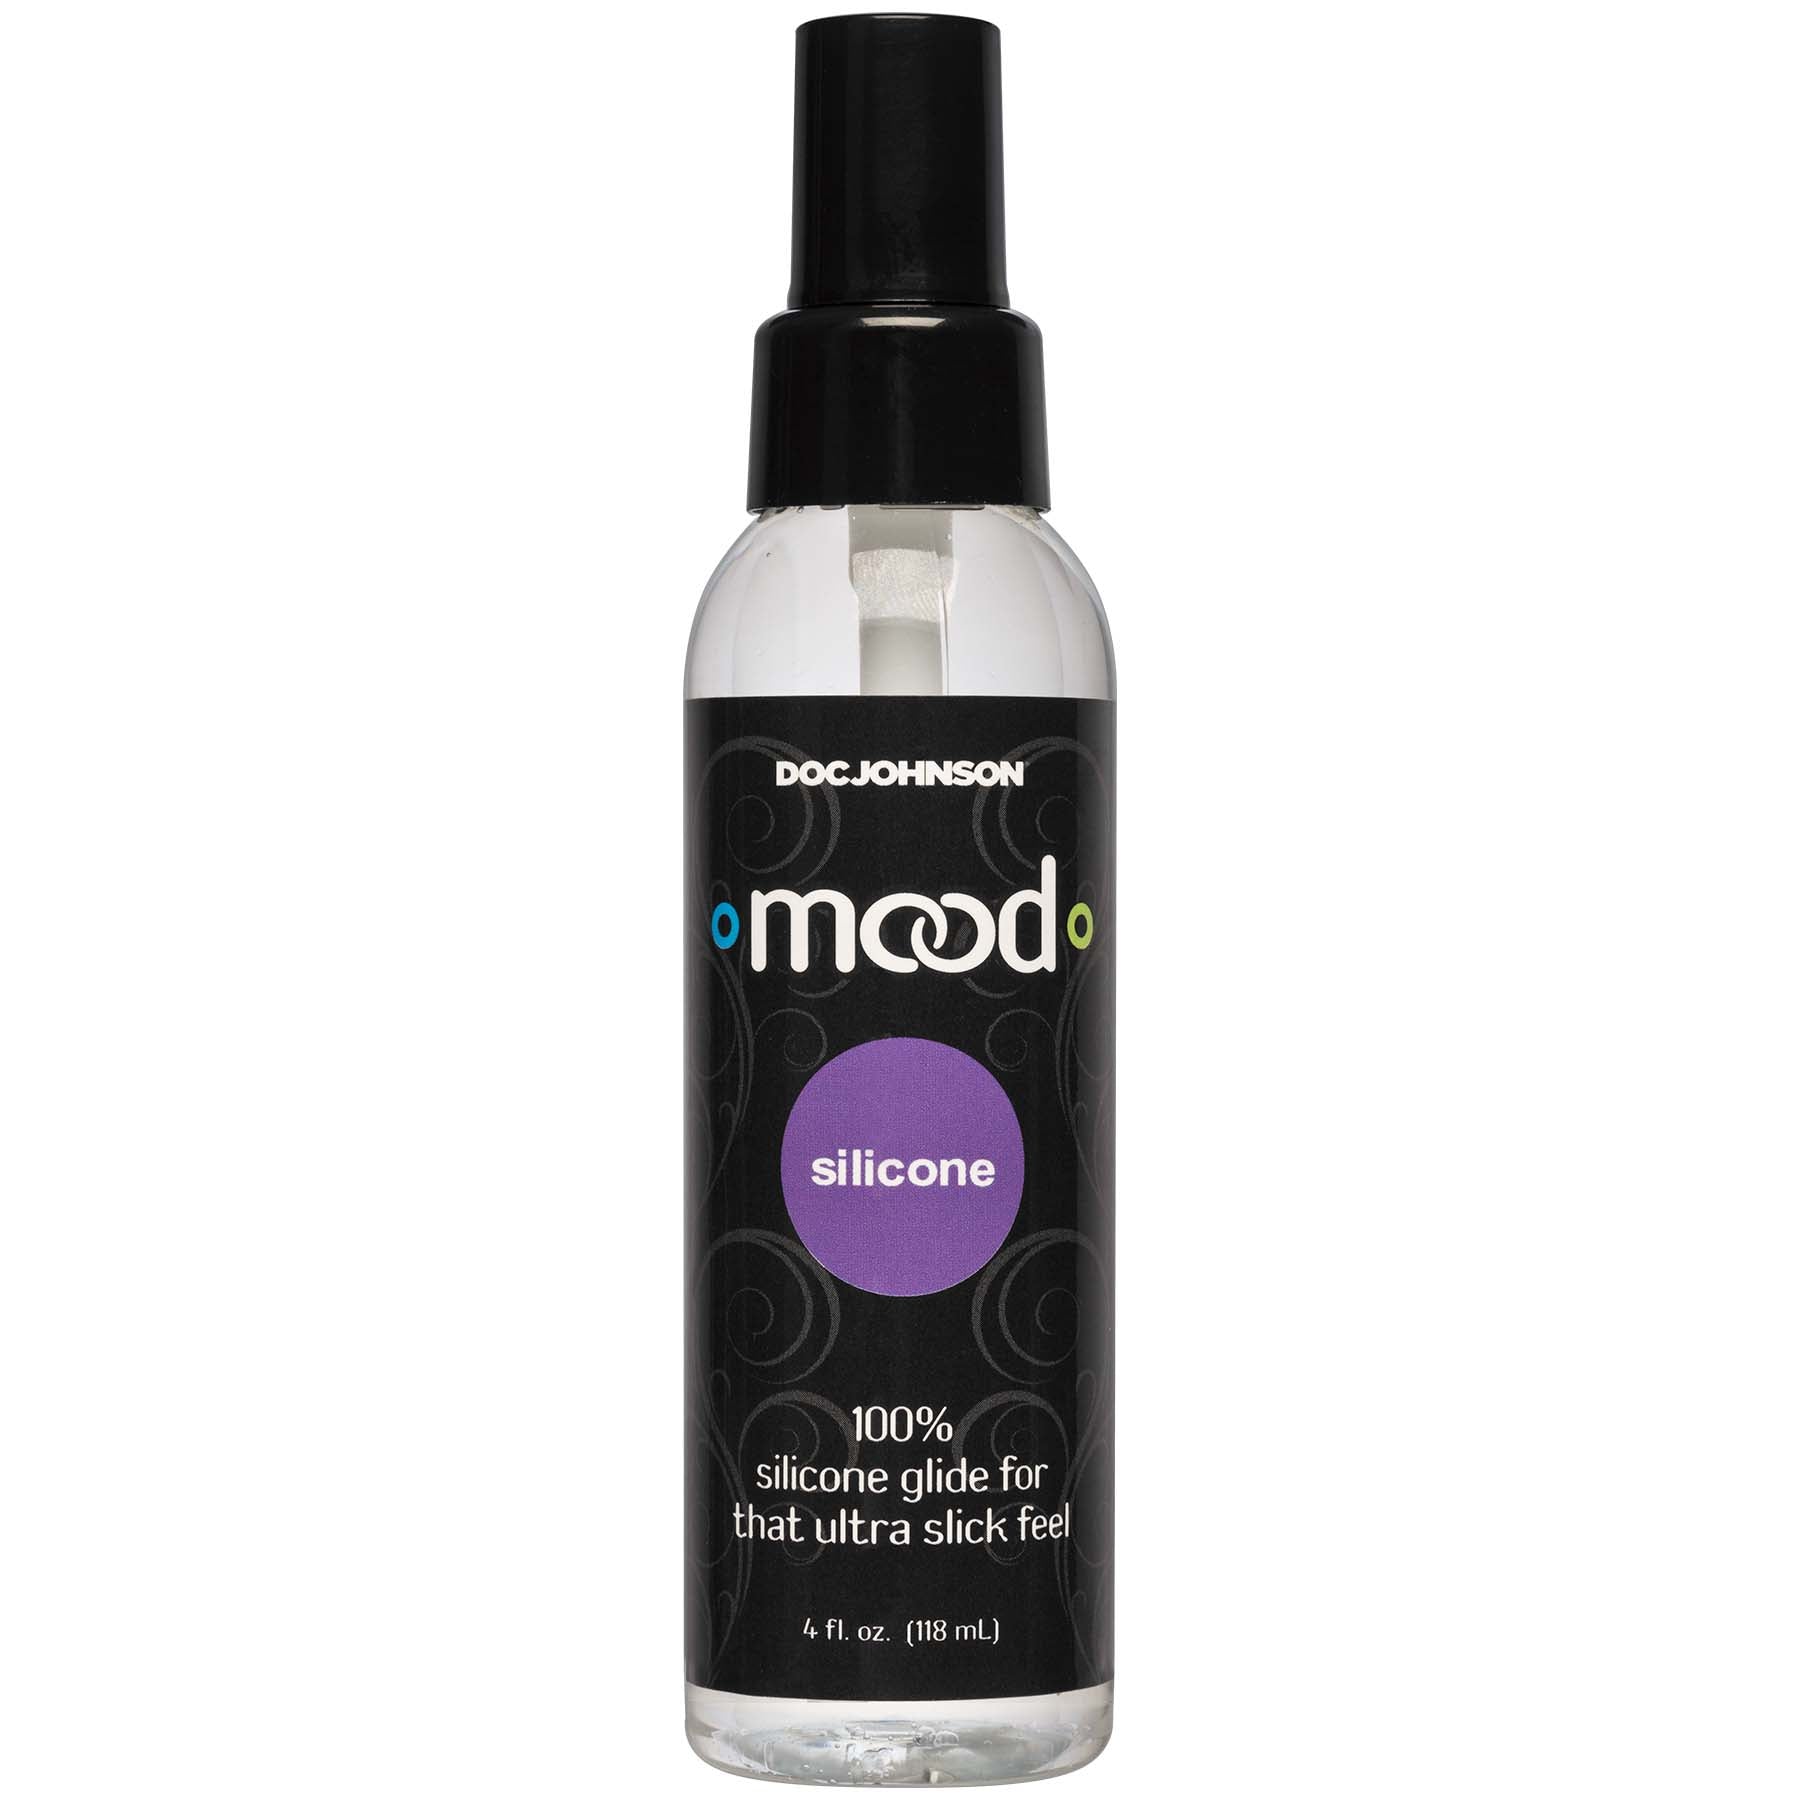 Doc Johnson Mood Silicone Lubricant 4 oz. - Extreme Toyz Singapore - https://extremetoyz.com.sg - Sex Toys and Lingerie Online Store - Bondage Gear / Vibrators / Electrosex Toys / Wireless Remote Control Vibes / Sexy Lingerie and Role Play / BDSM / Dungeon Furnitures / Dildos and Strap Ons &nbsp;/ Anal and Prostate Massagers / Anal Douche and Cleaning Aide / Delay Sprays and Gels / Lubricants and more...